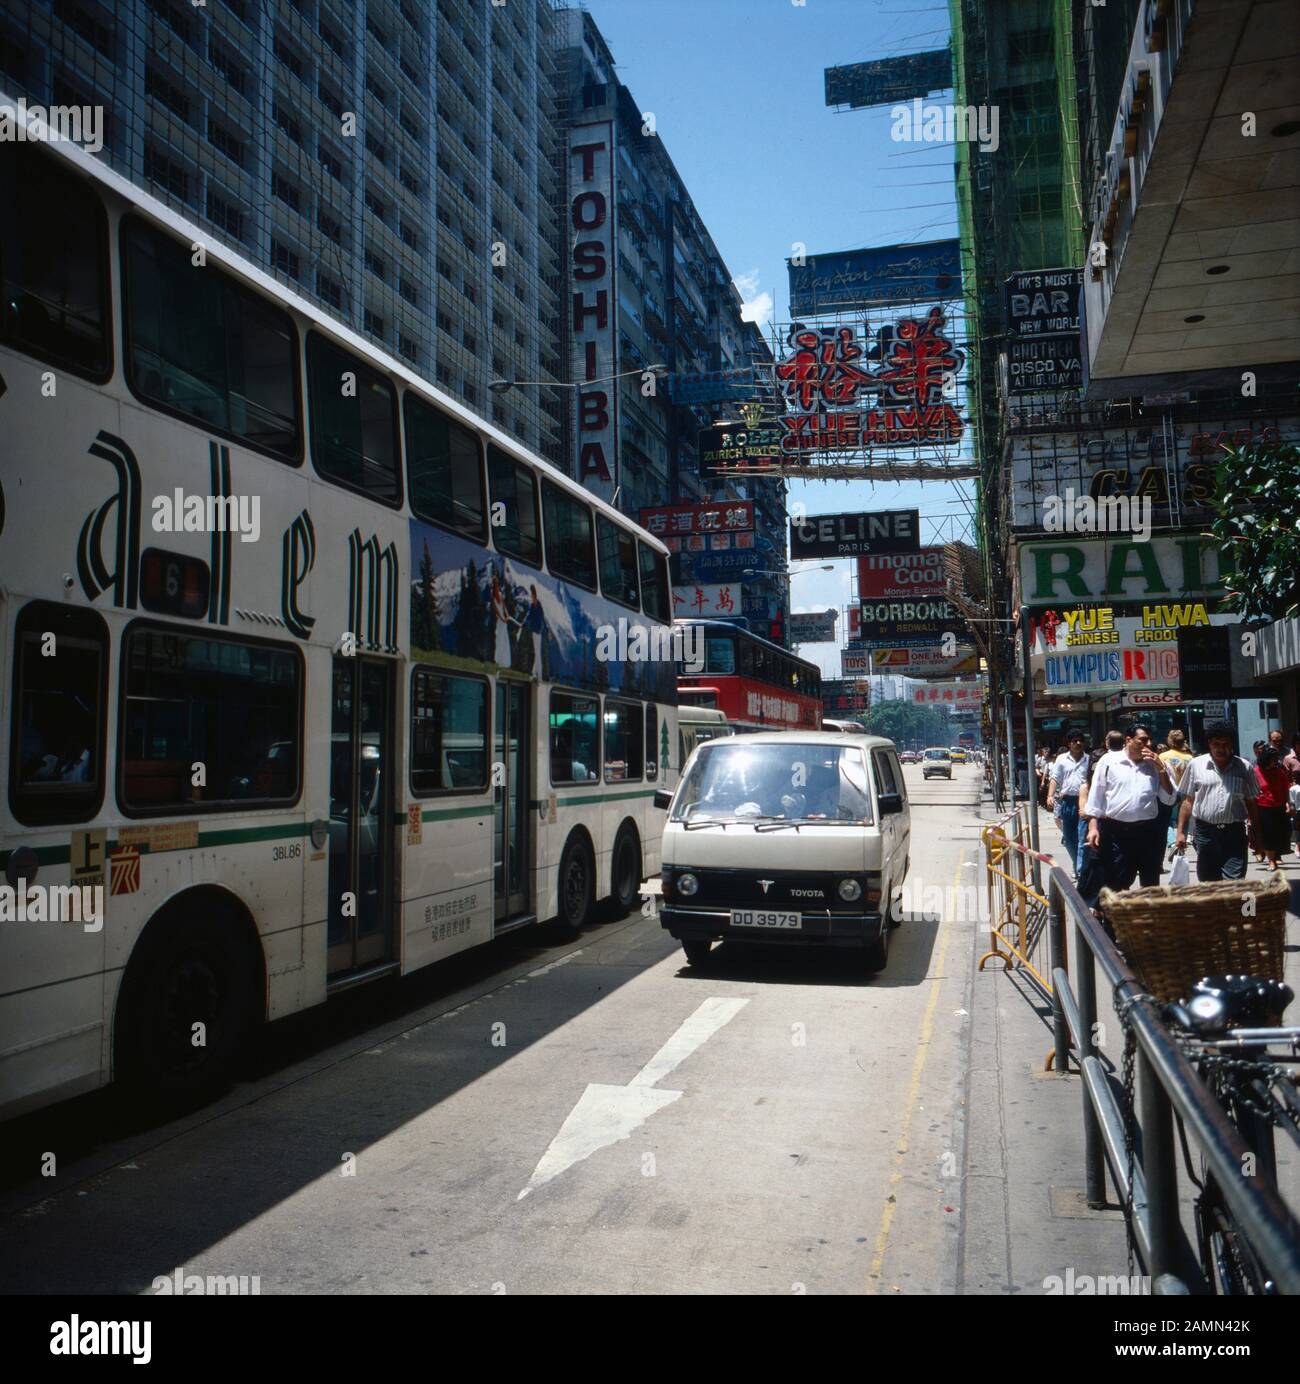 Doppelstöckiger Bus in Hongkong, 1980er Jahre. Double decker bus in the streets of Hong Kong, 1980s. Stock Photo